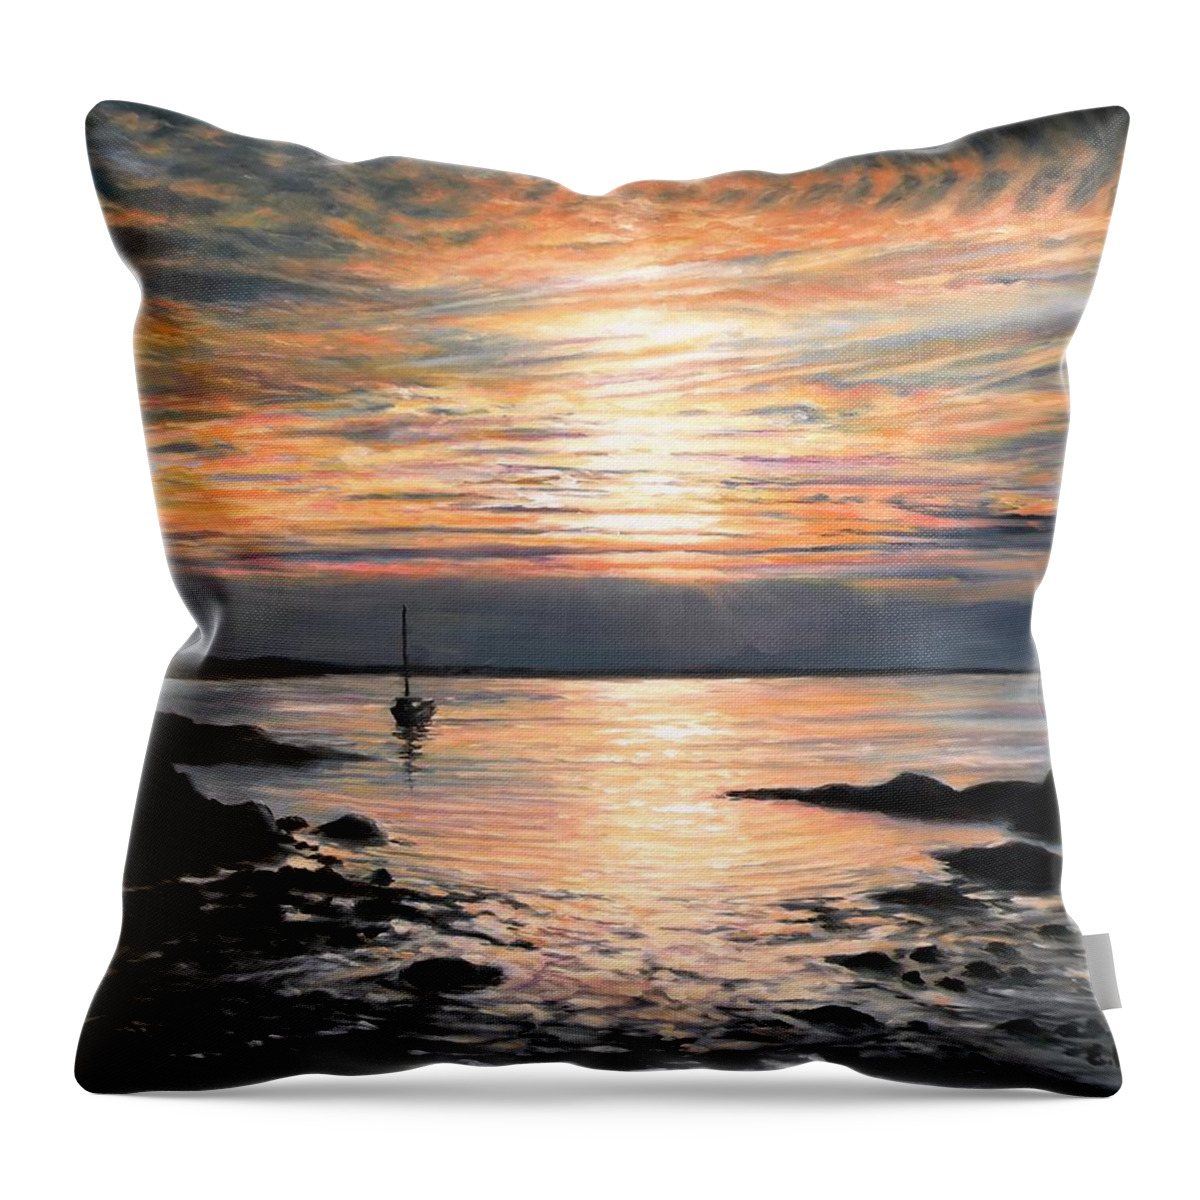 Plum Cove Throw Pillow featuring the painting Plum Cove Sunset by Eileen Patten Oliver